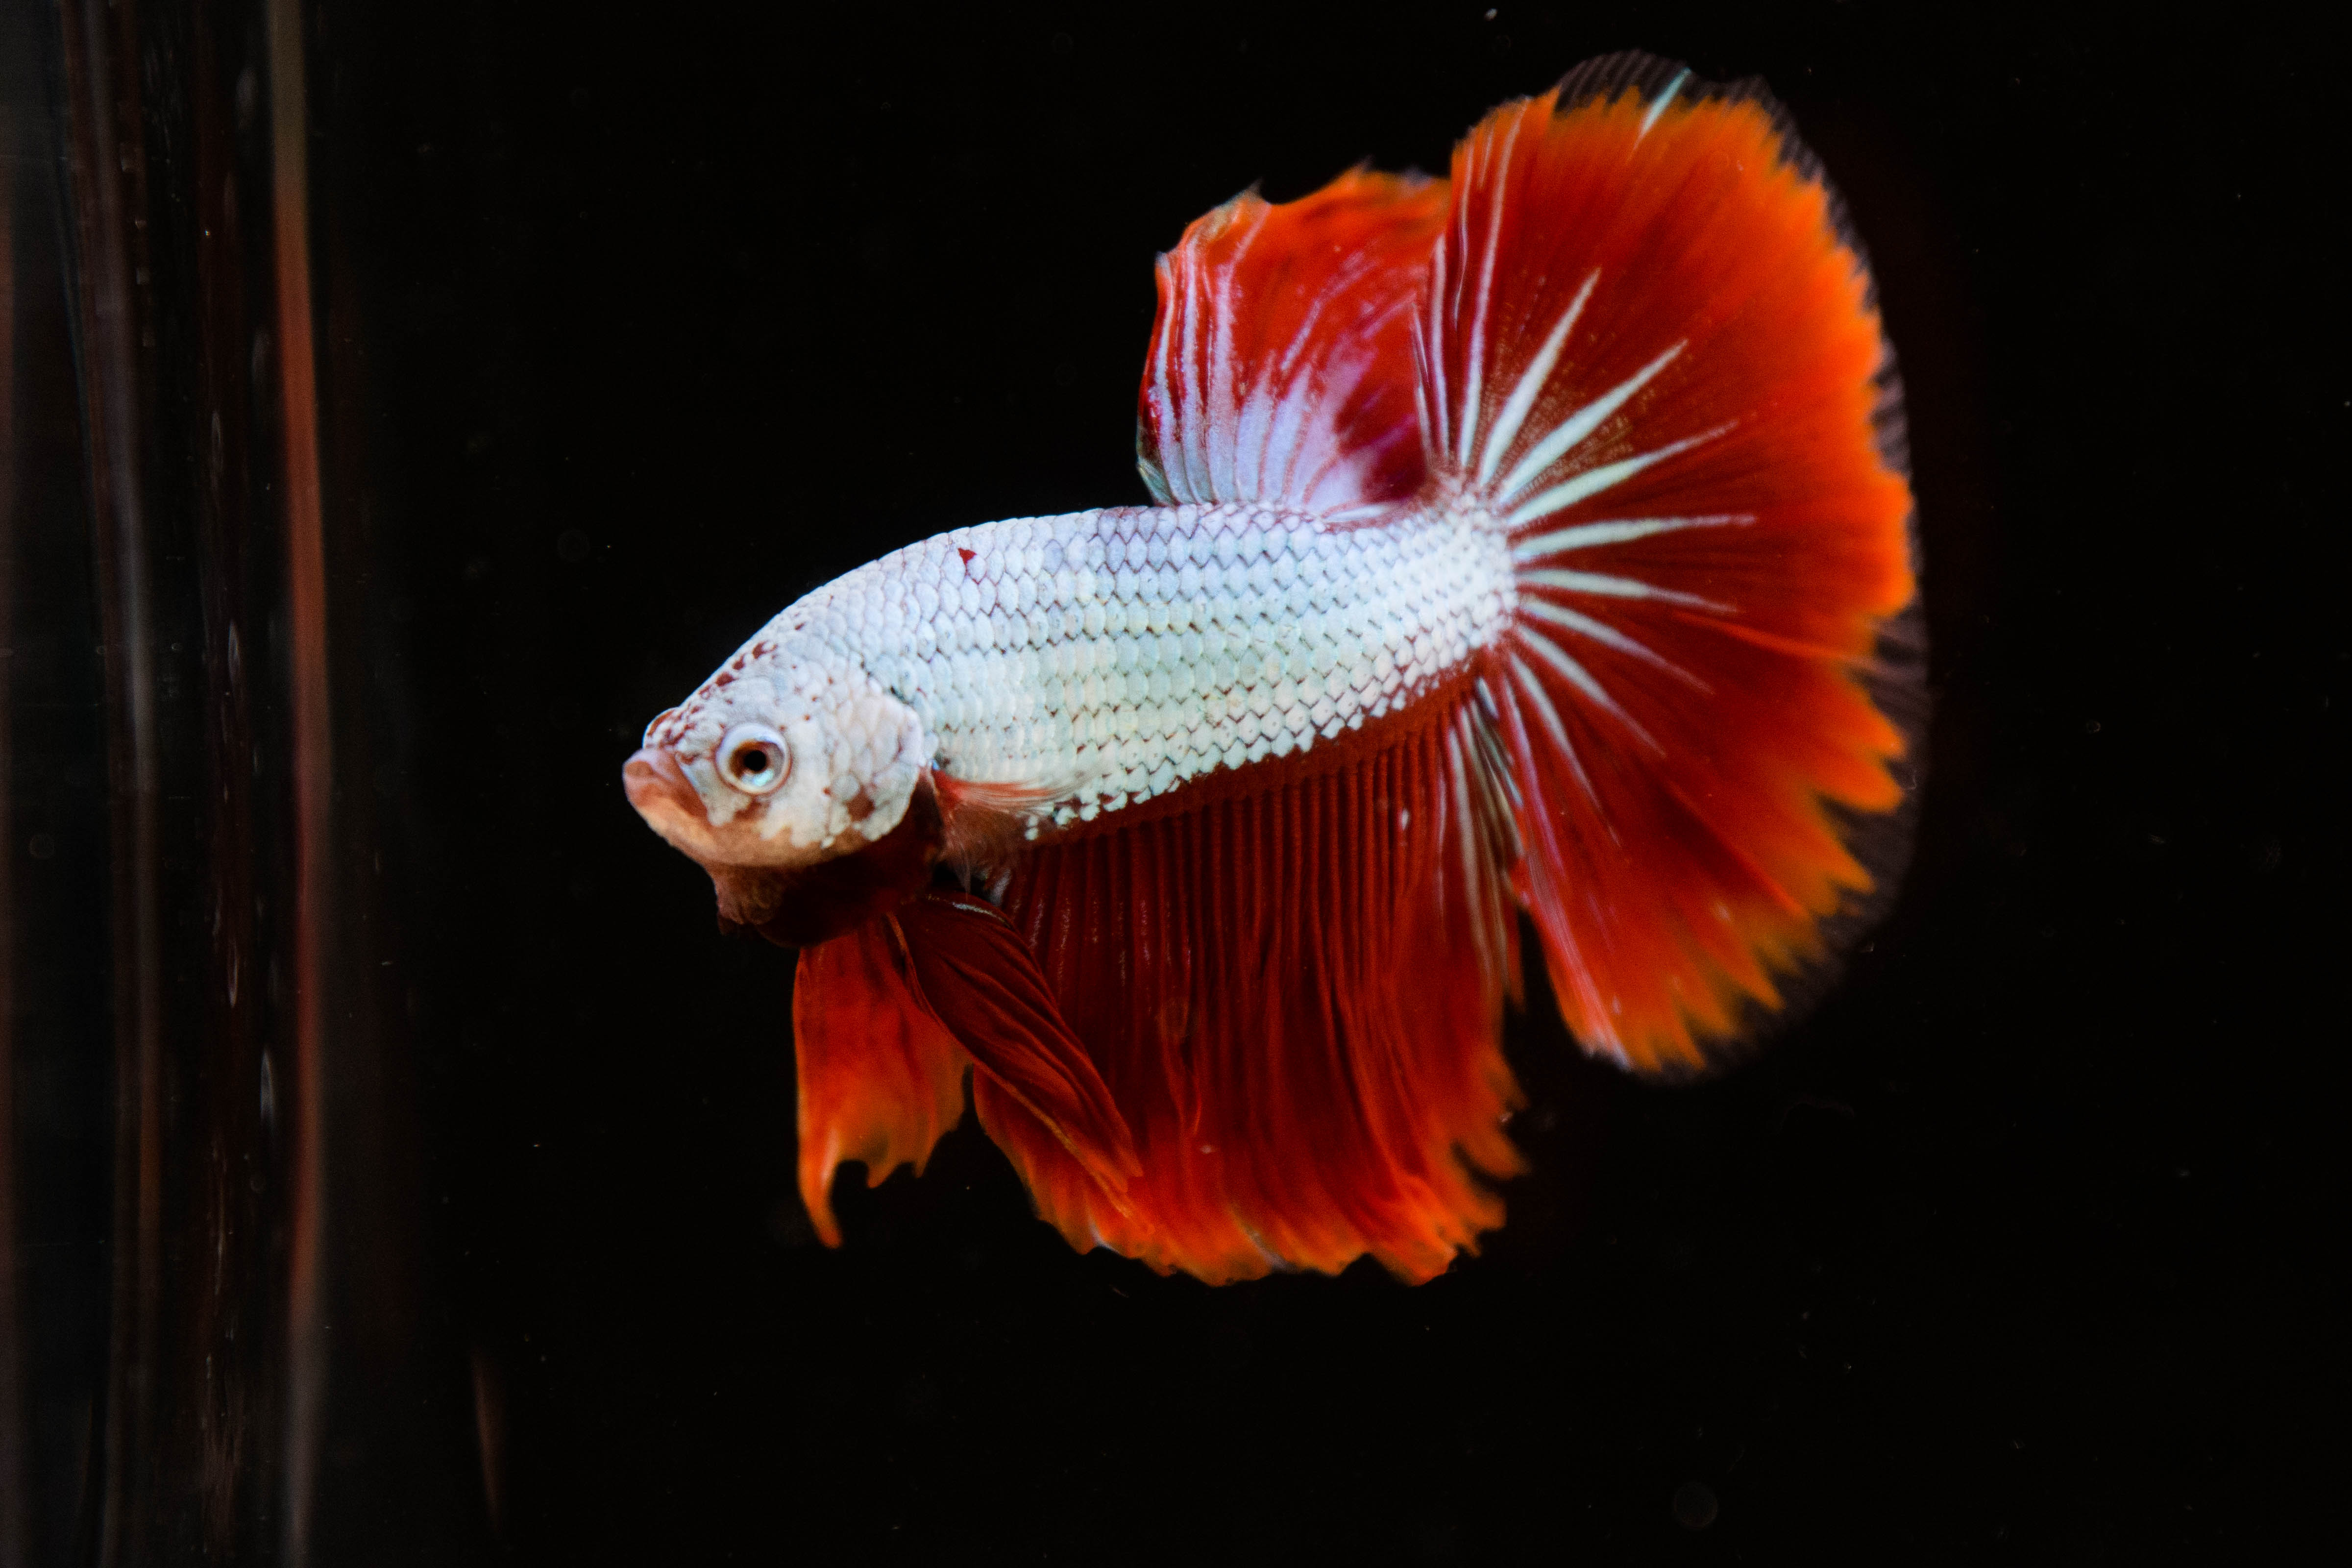 Red Dragon Betta Fish For Sale | Freshwater Fish Tank